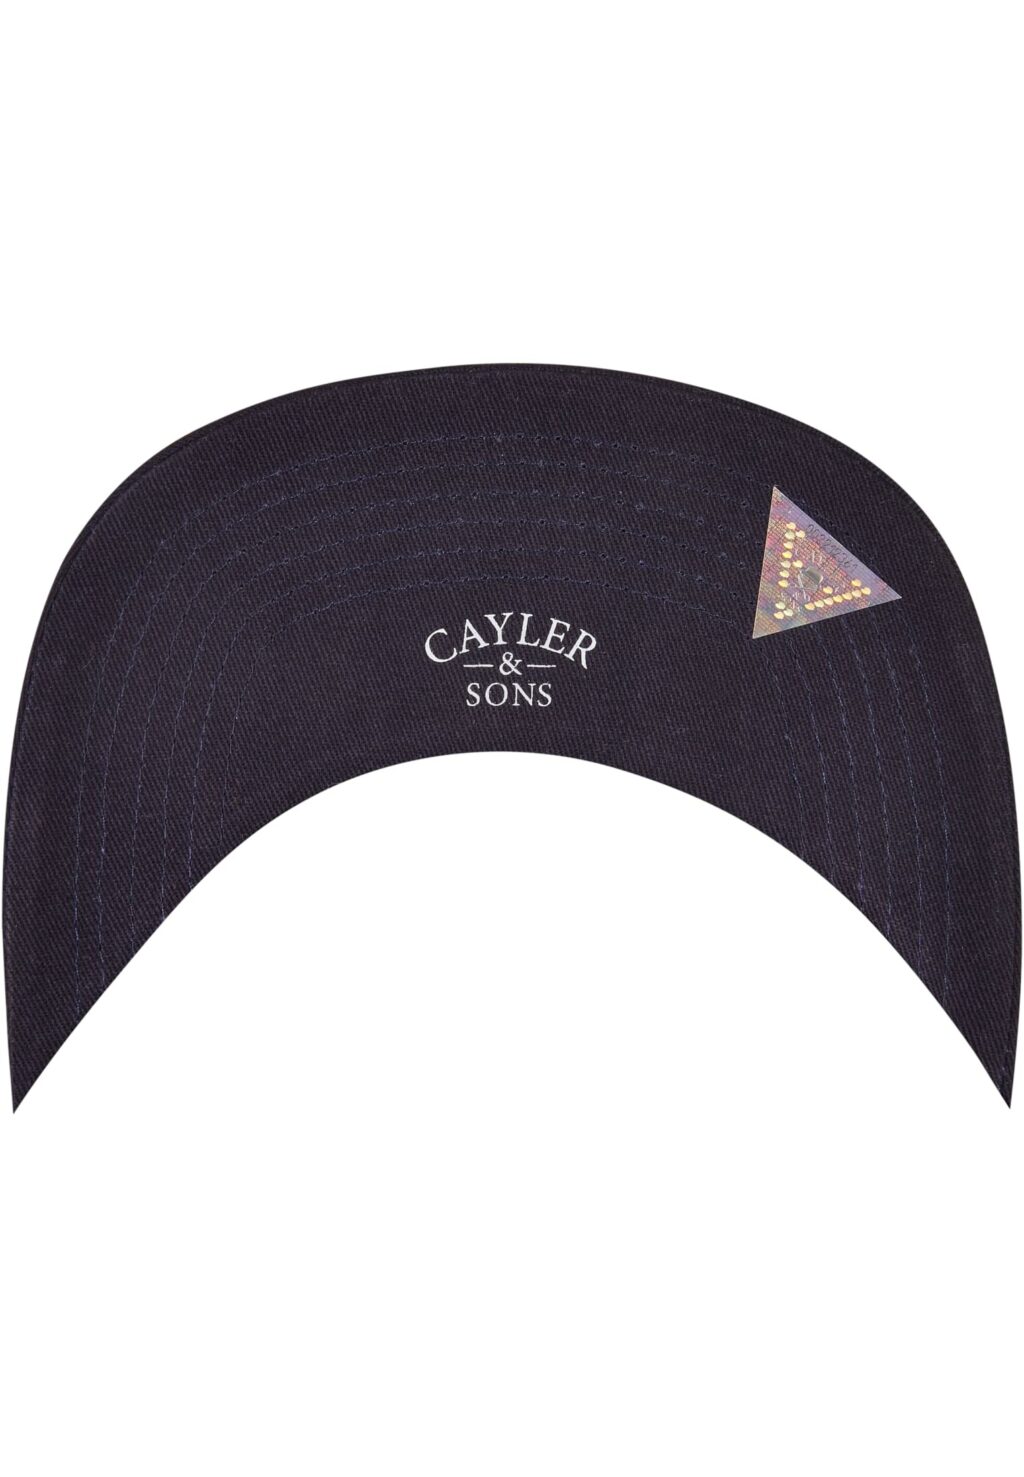 Streets of NYC Cap navy/offwhite one CS3020